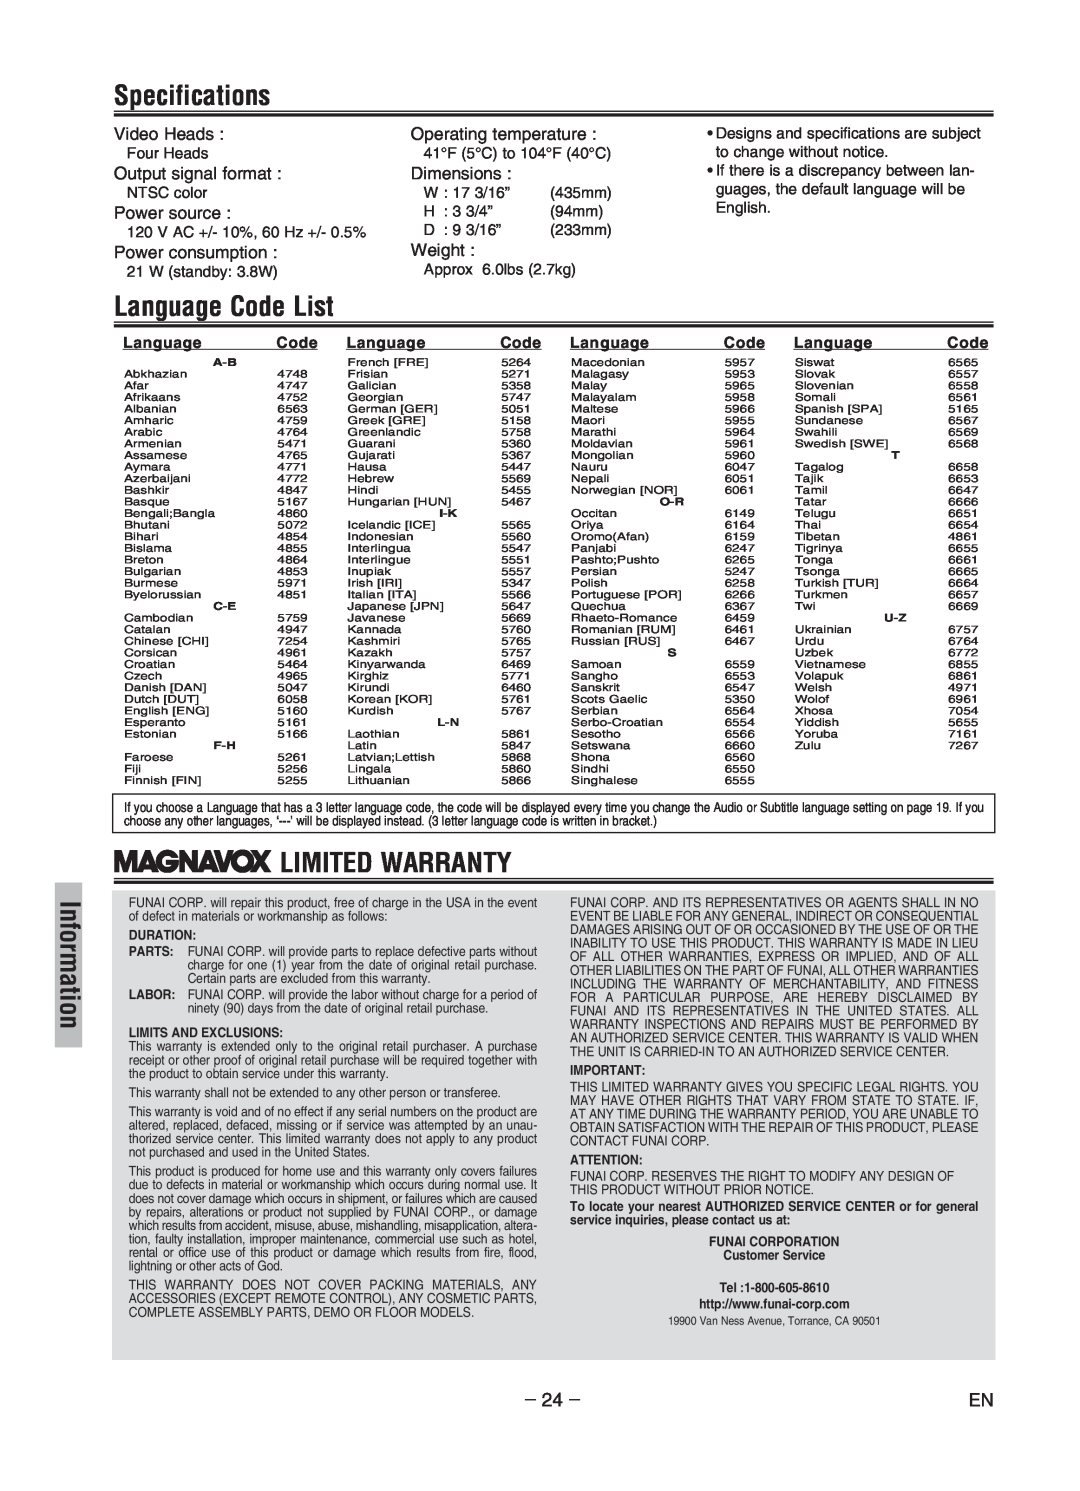 Magnavox MWD2206A Specifications, Language Code List, Limited Warranty, Video Heads, Output signal format, Power source 